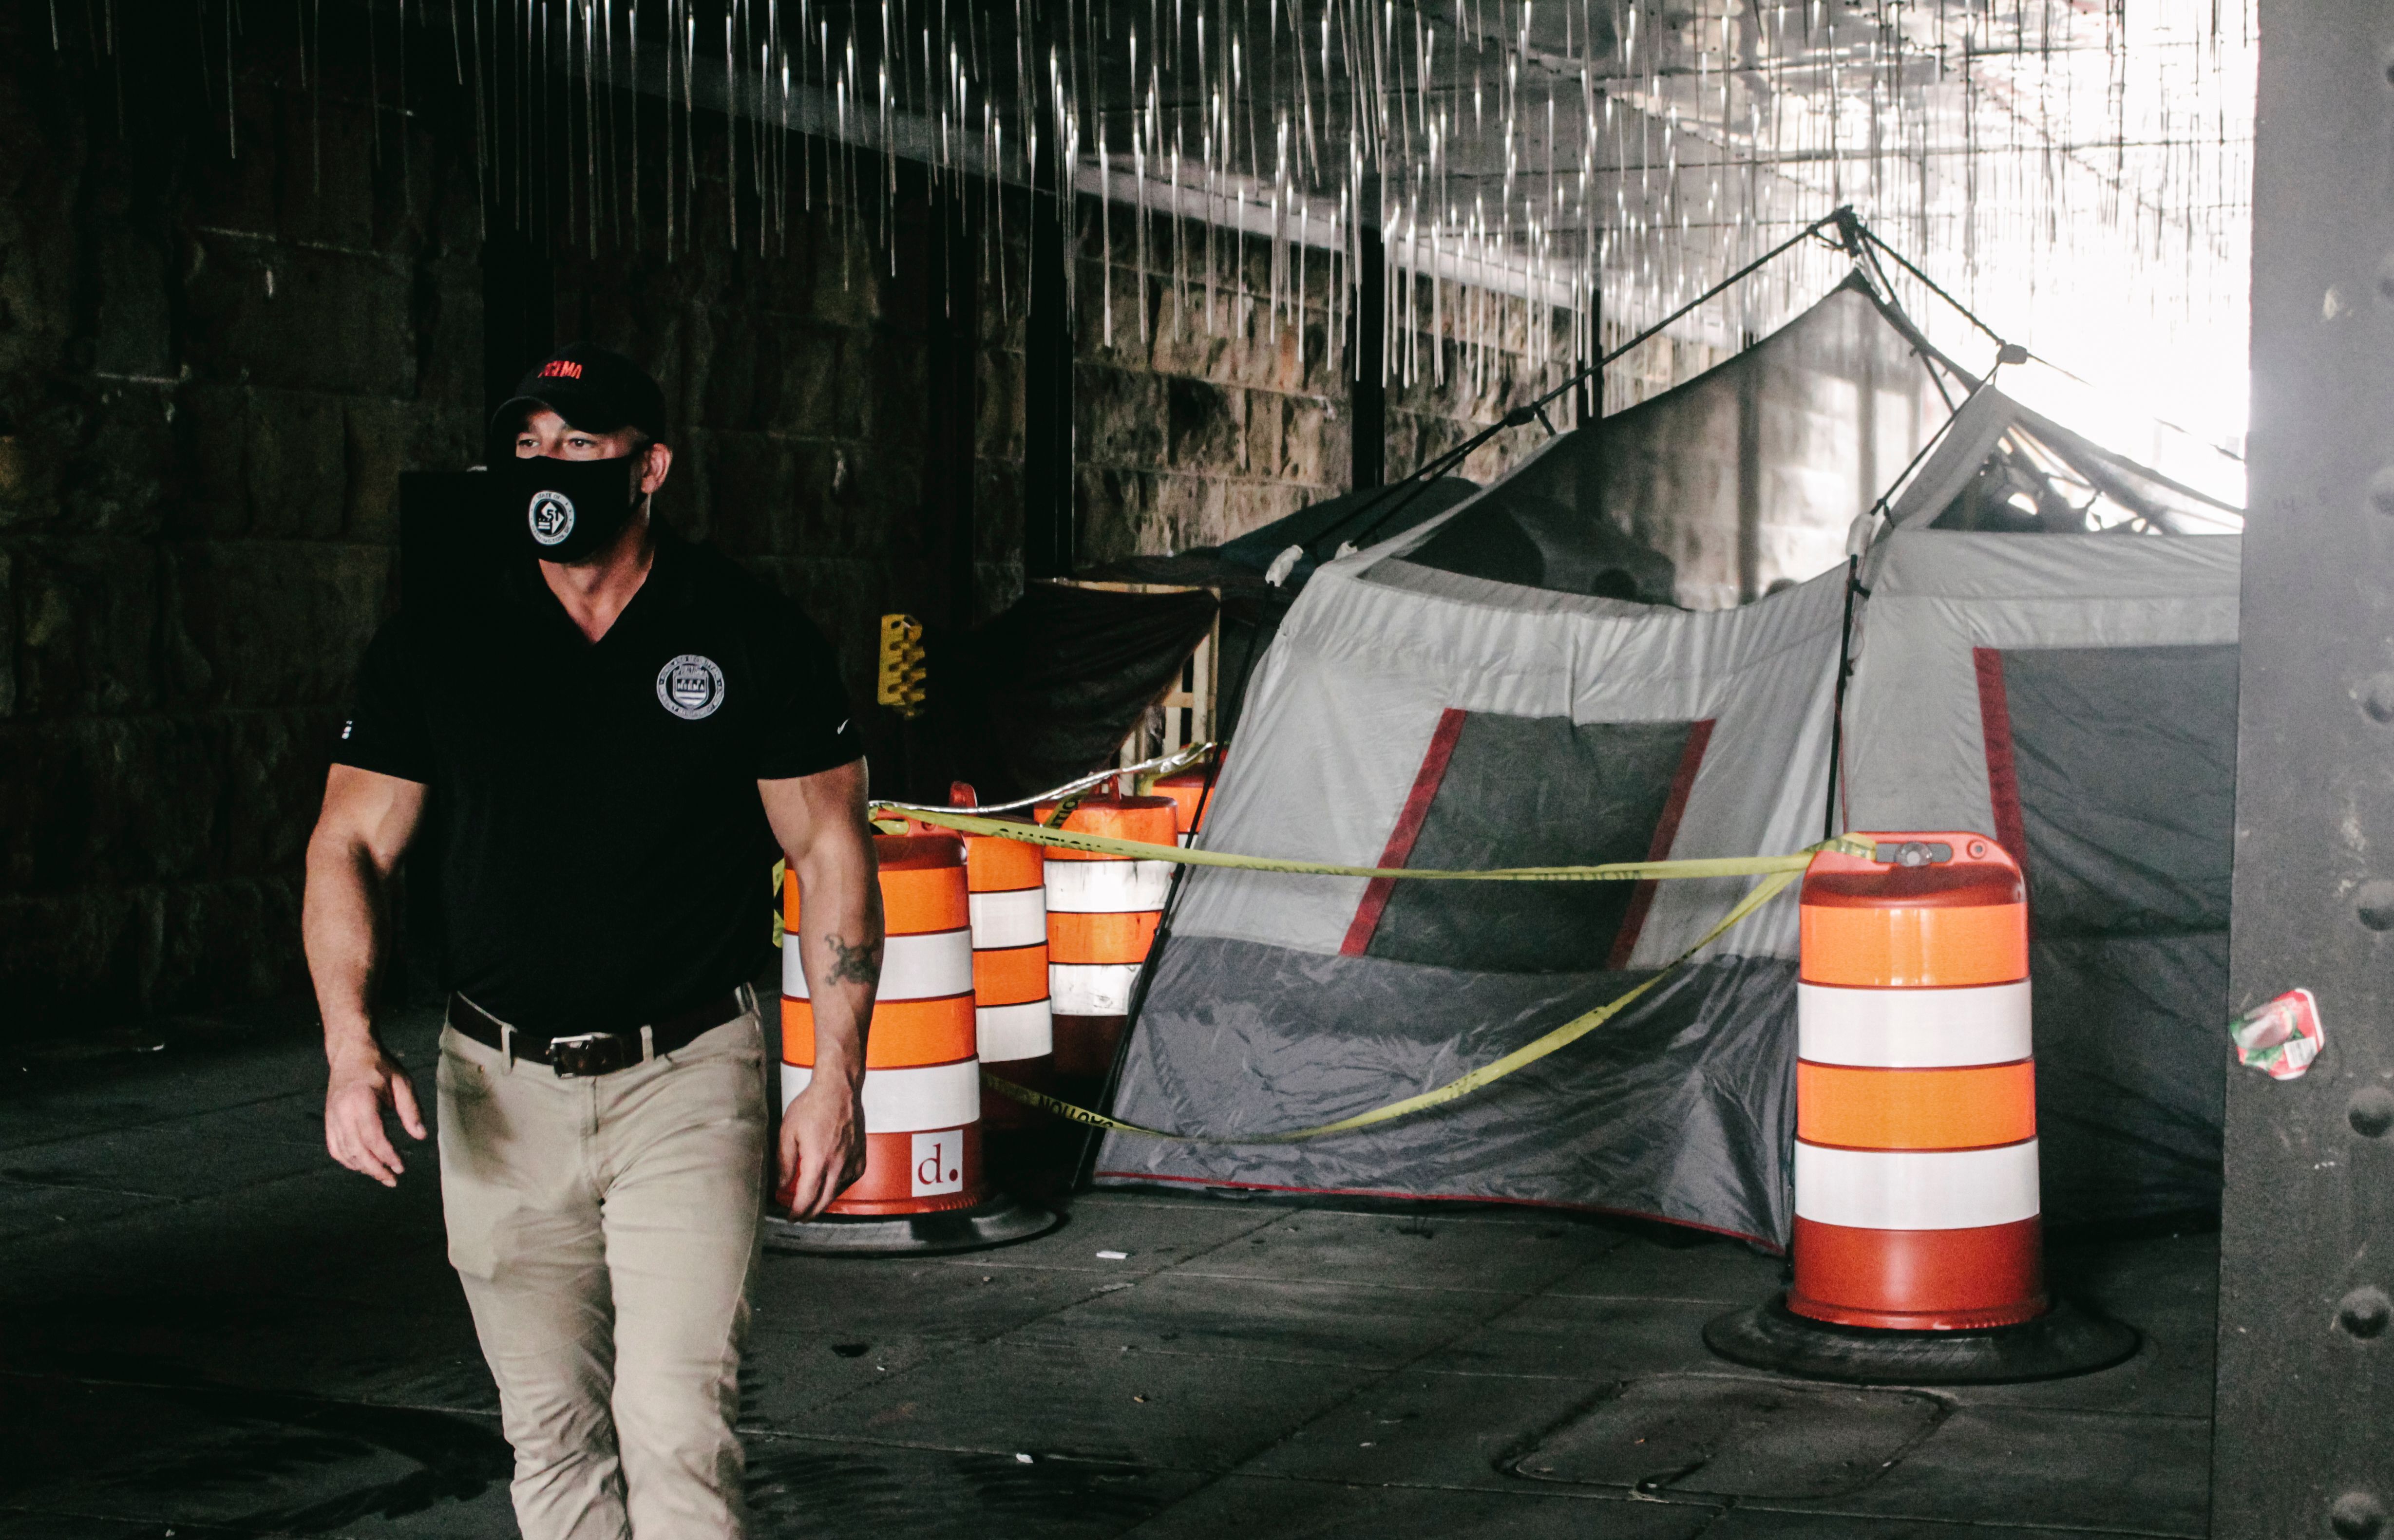 Deputy Mayor for Public Safety and Justice Christopher Geldart wearing HSEMA clothing while walking through the taped off underpass at M & 2nd St. NE. 